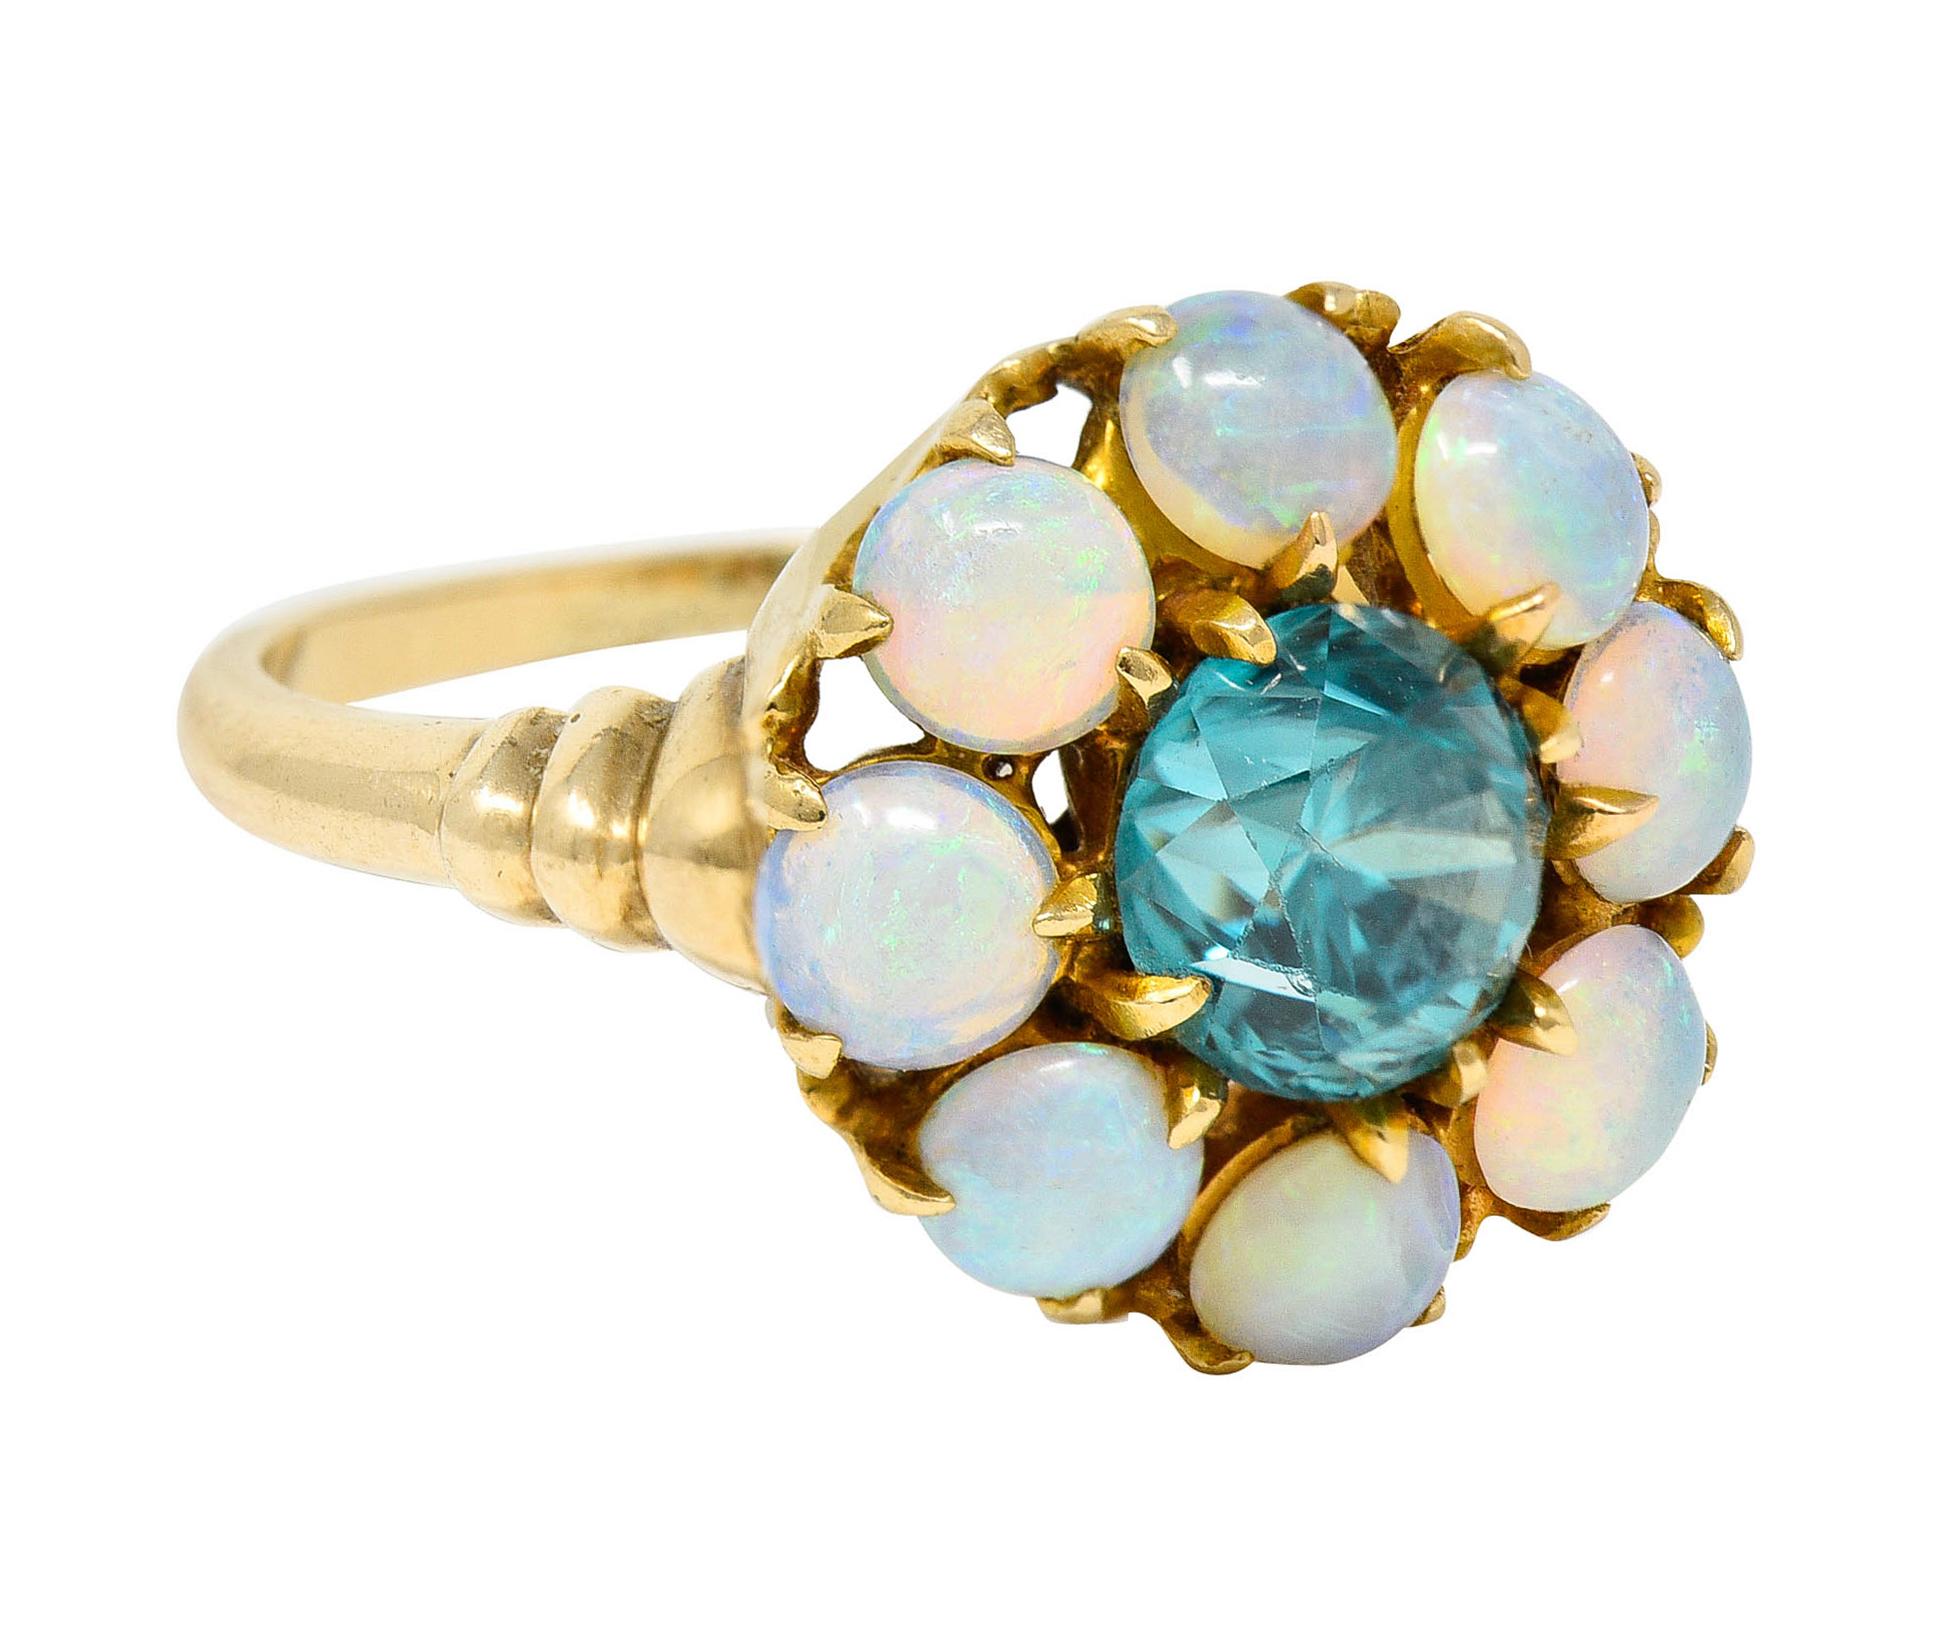 Centering a 6.0 mm round cut zircon with saturated greenish blue color

Surrounded by a halo of 3.5 mm round opal cabochons

Well matched white body color with strong green and yellow play-of-color

Completed by ribbed shoulders

Stamped 14K for 14